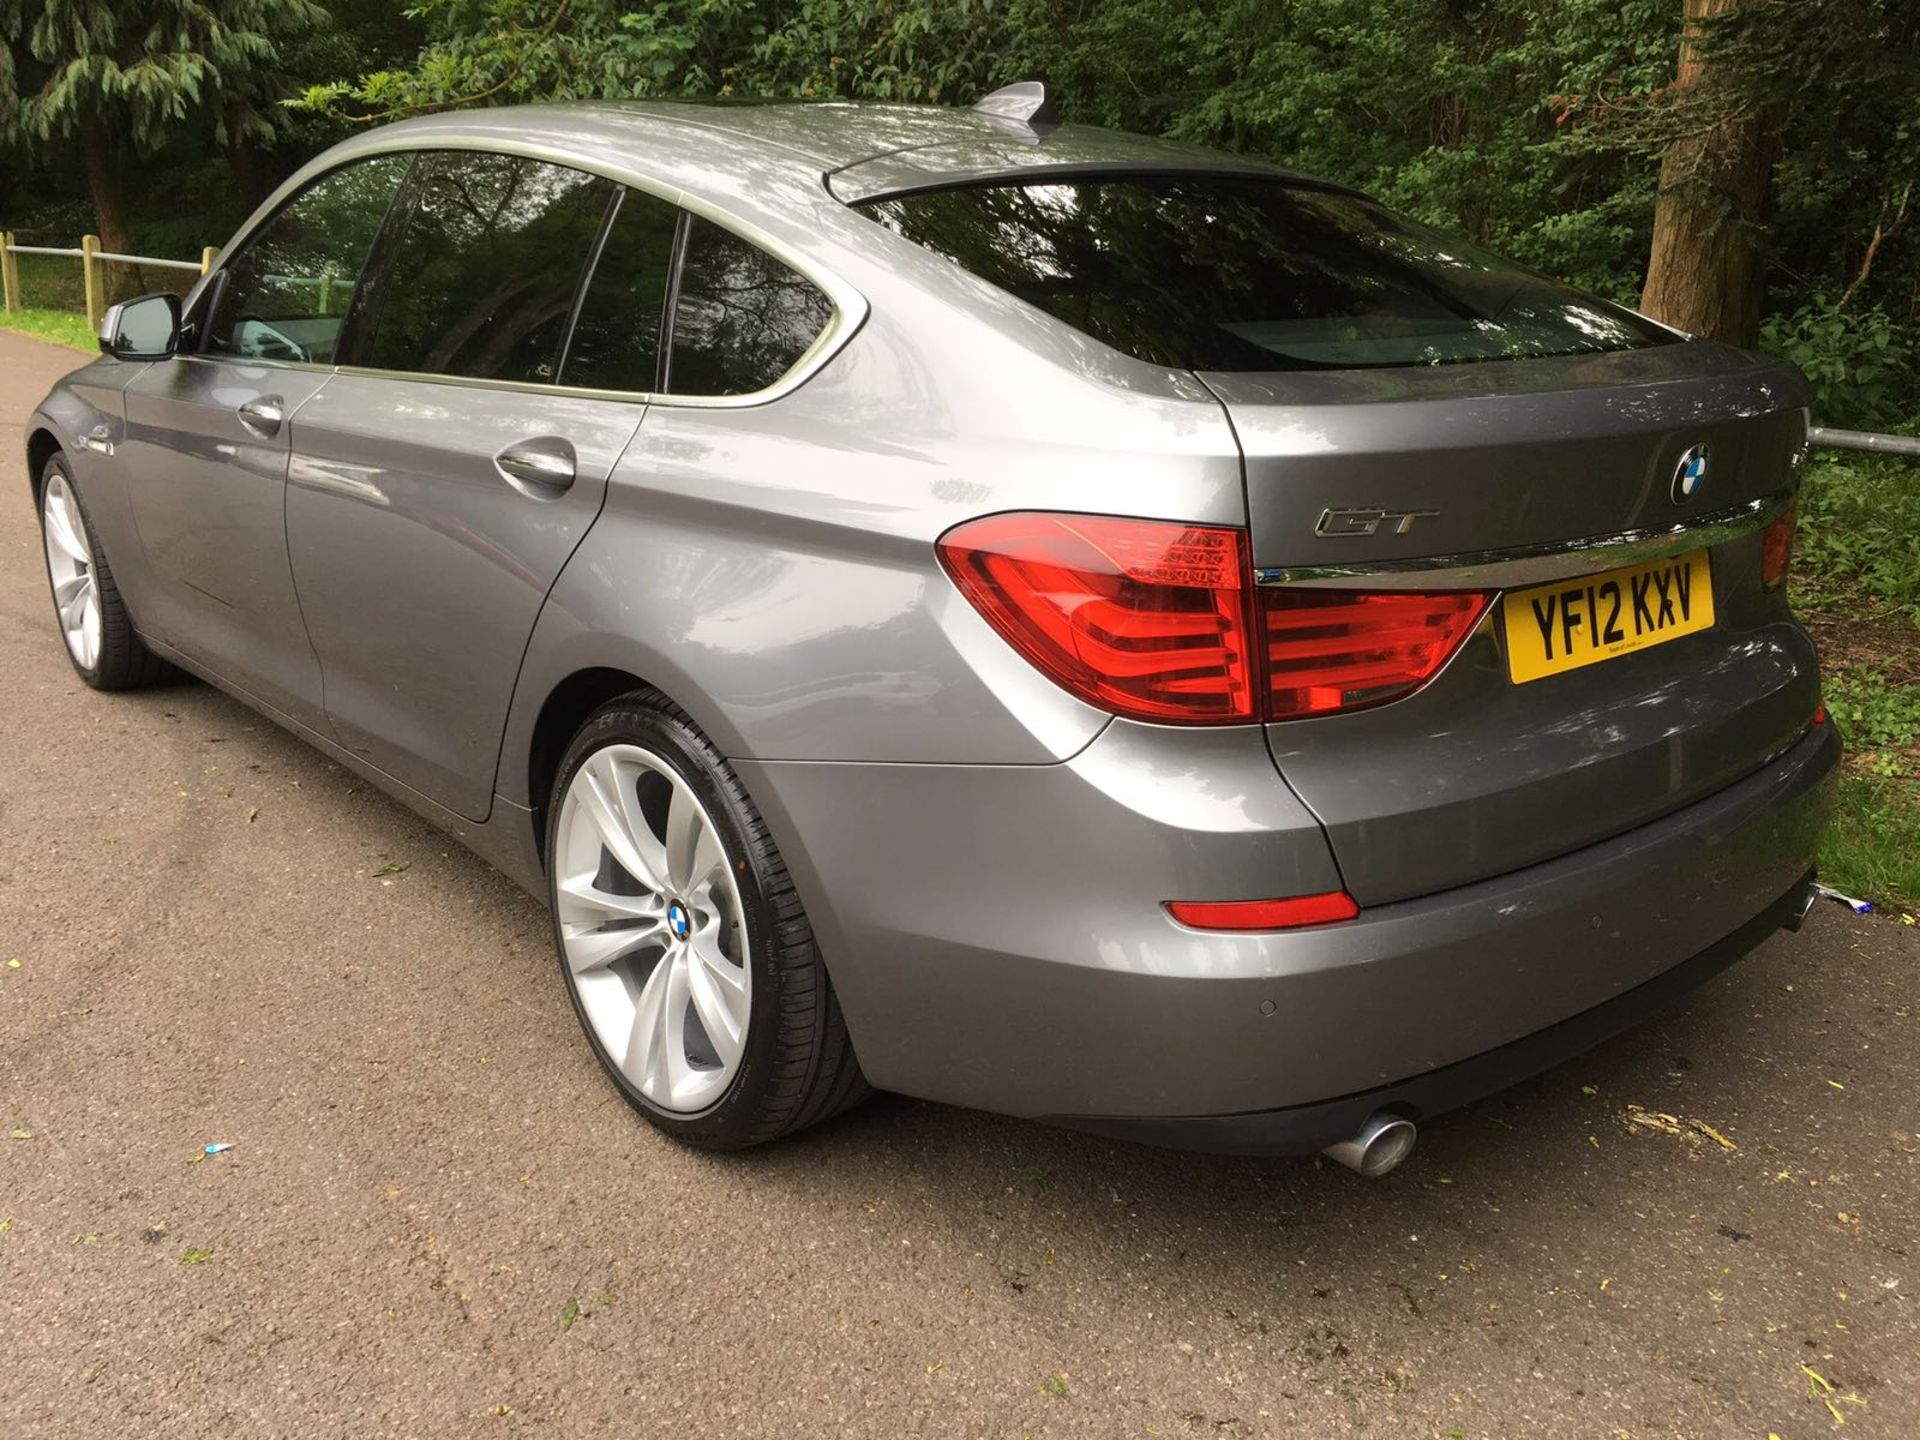 BMW 535D GT Gran Turismo 2012/12. 57,000 Miles. Automatic Gearbox - Image 5 of 19